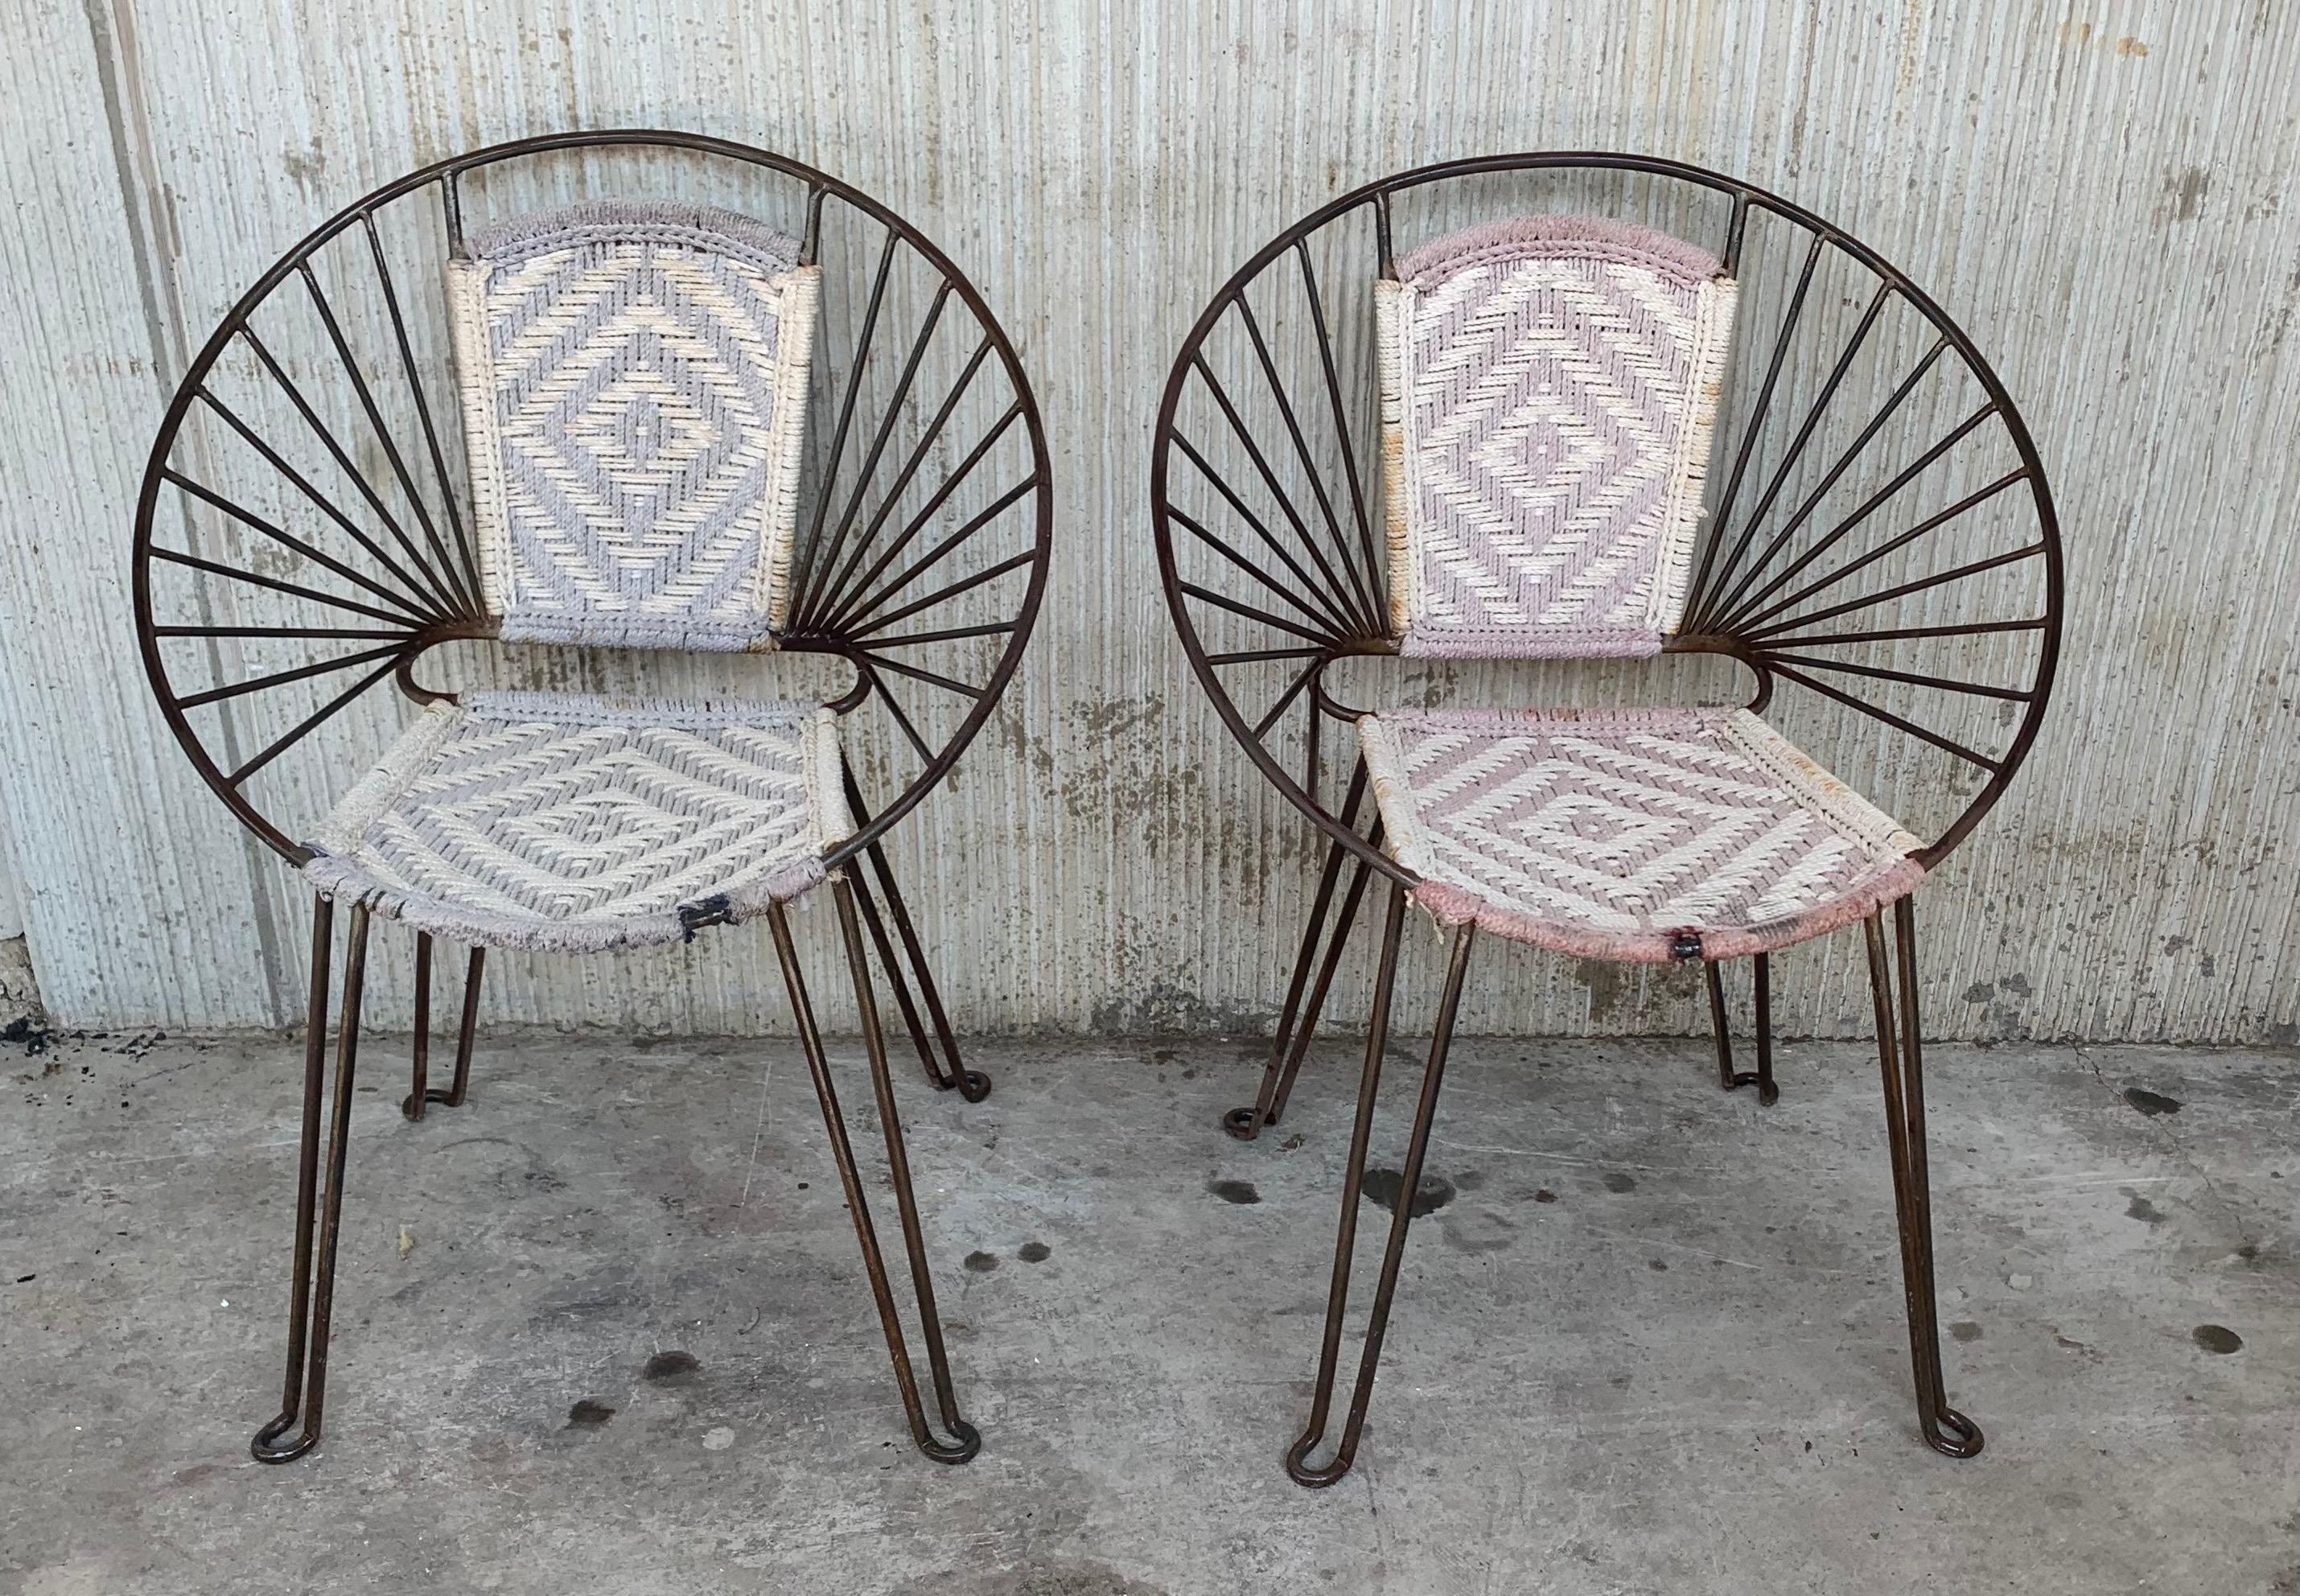 Great Mid-Century Modern iron chairs in a striking bare metal style finish. Wonderful round frame, caned seat, strong iron legs. Vintage modern Salterini style design.